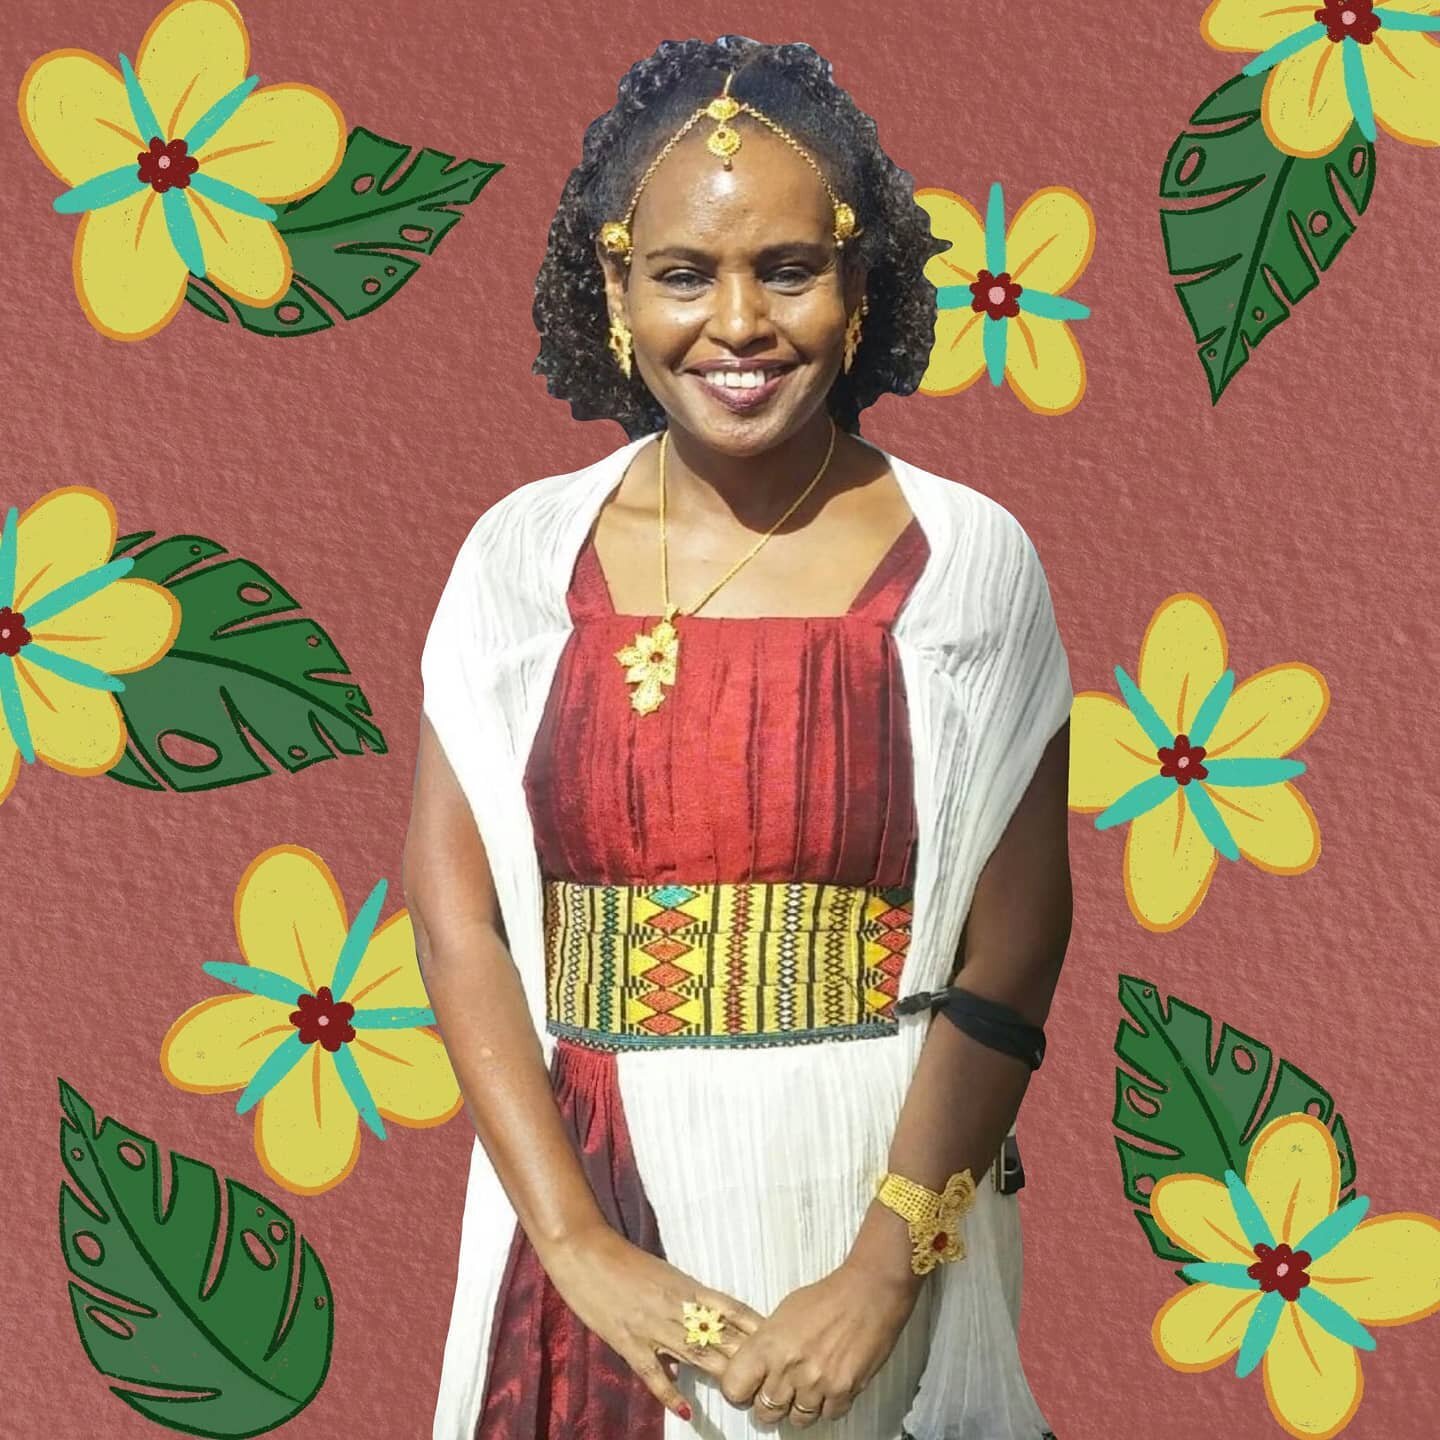 Biruk Alemayehu, PhD. started @addisnola in 2019 as a vision to bring amazing Ethiopian cuisine to Nola. When she opened her Ethiopian restaurant, Addis NOLA, Biruk Alemayehu said that eating the food of her homeland means &quot;not only having a rel